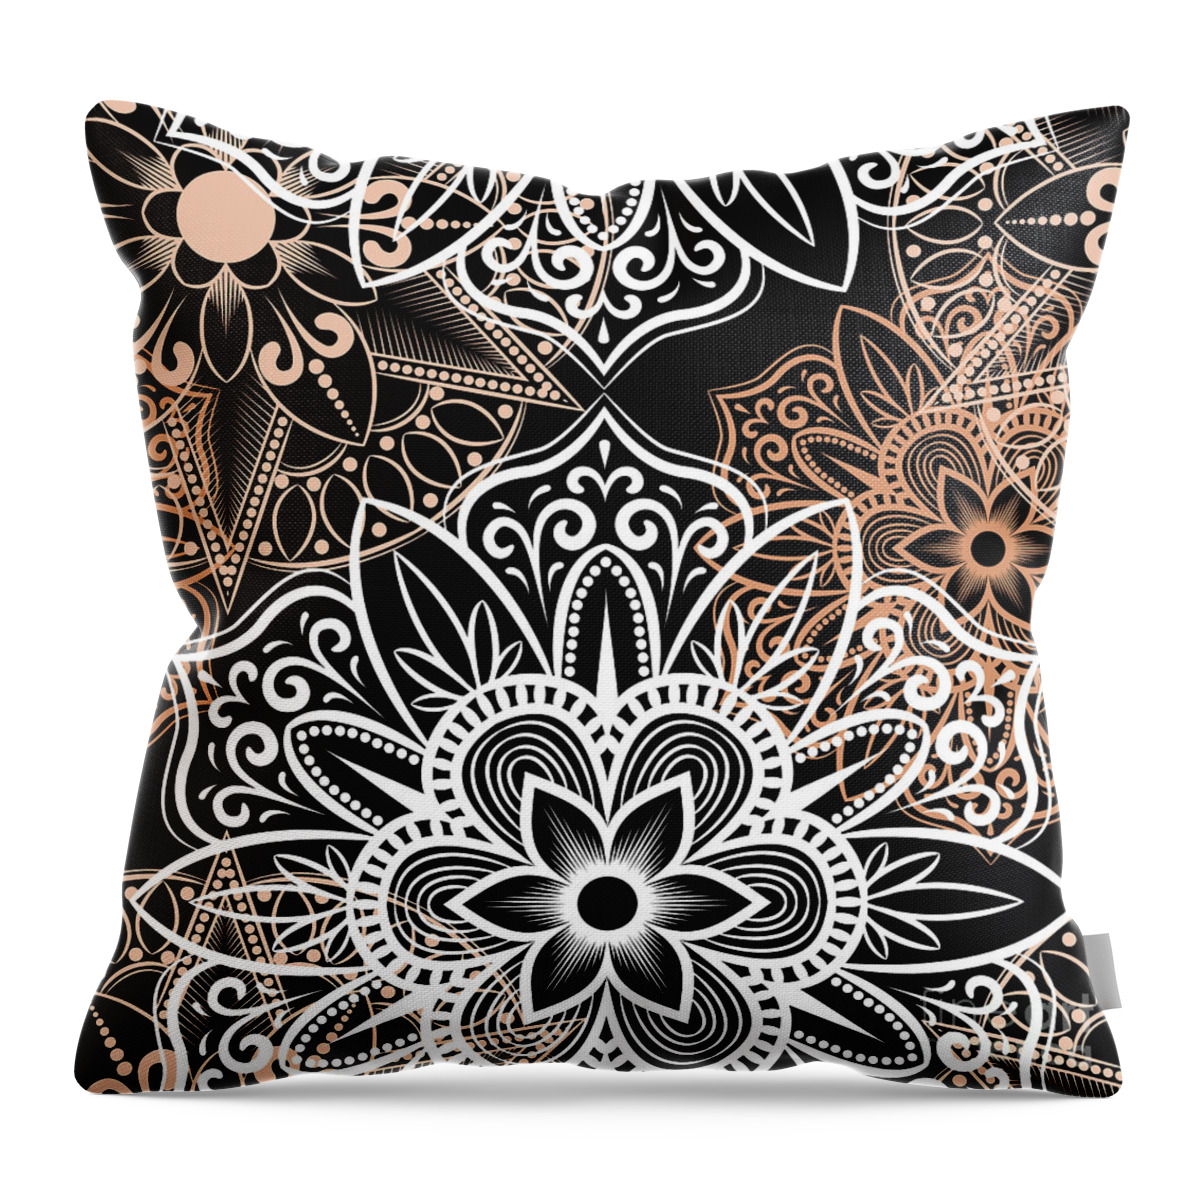 Colorful Throw Pillow featuring the digital art Verona - Artistic White Cream Mandala Pattern in Black Background by Sambel Pedes